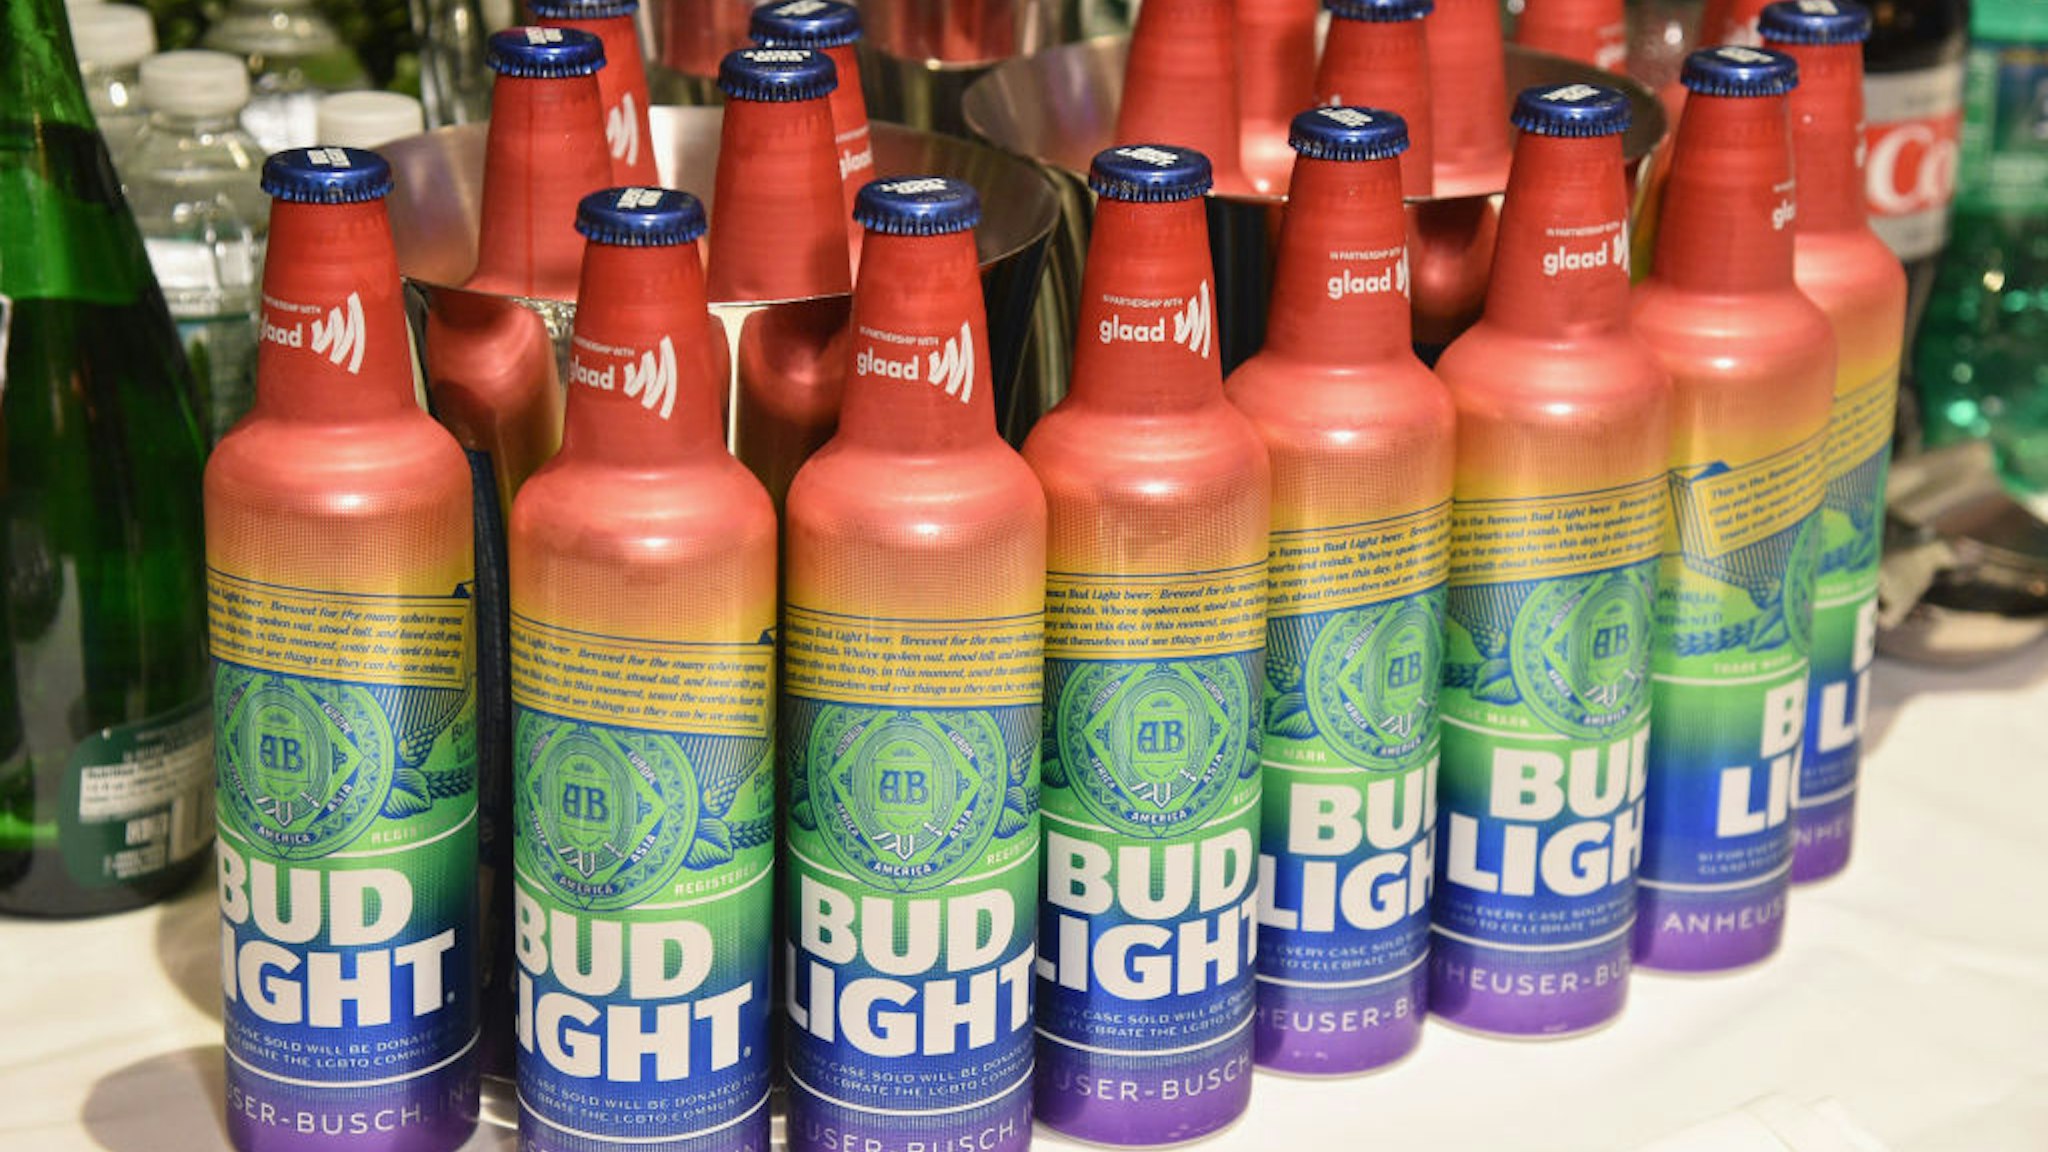 NEW YORK, NEW YORK - MAY 04: A view of rainbow bottles of Bud Light during the 30th Annual GLAAD Media Awards New York at New York Hilton Midtown on May 04, 2019 in New York City.